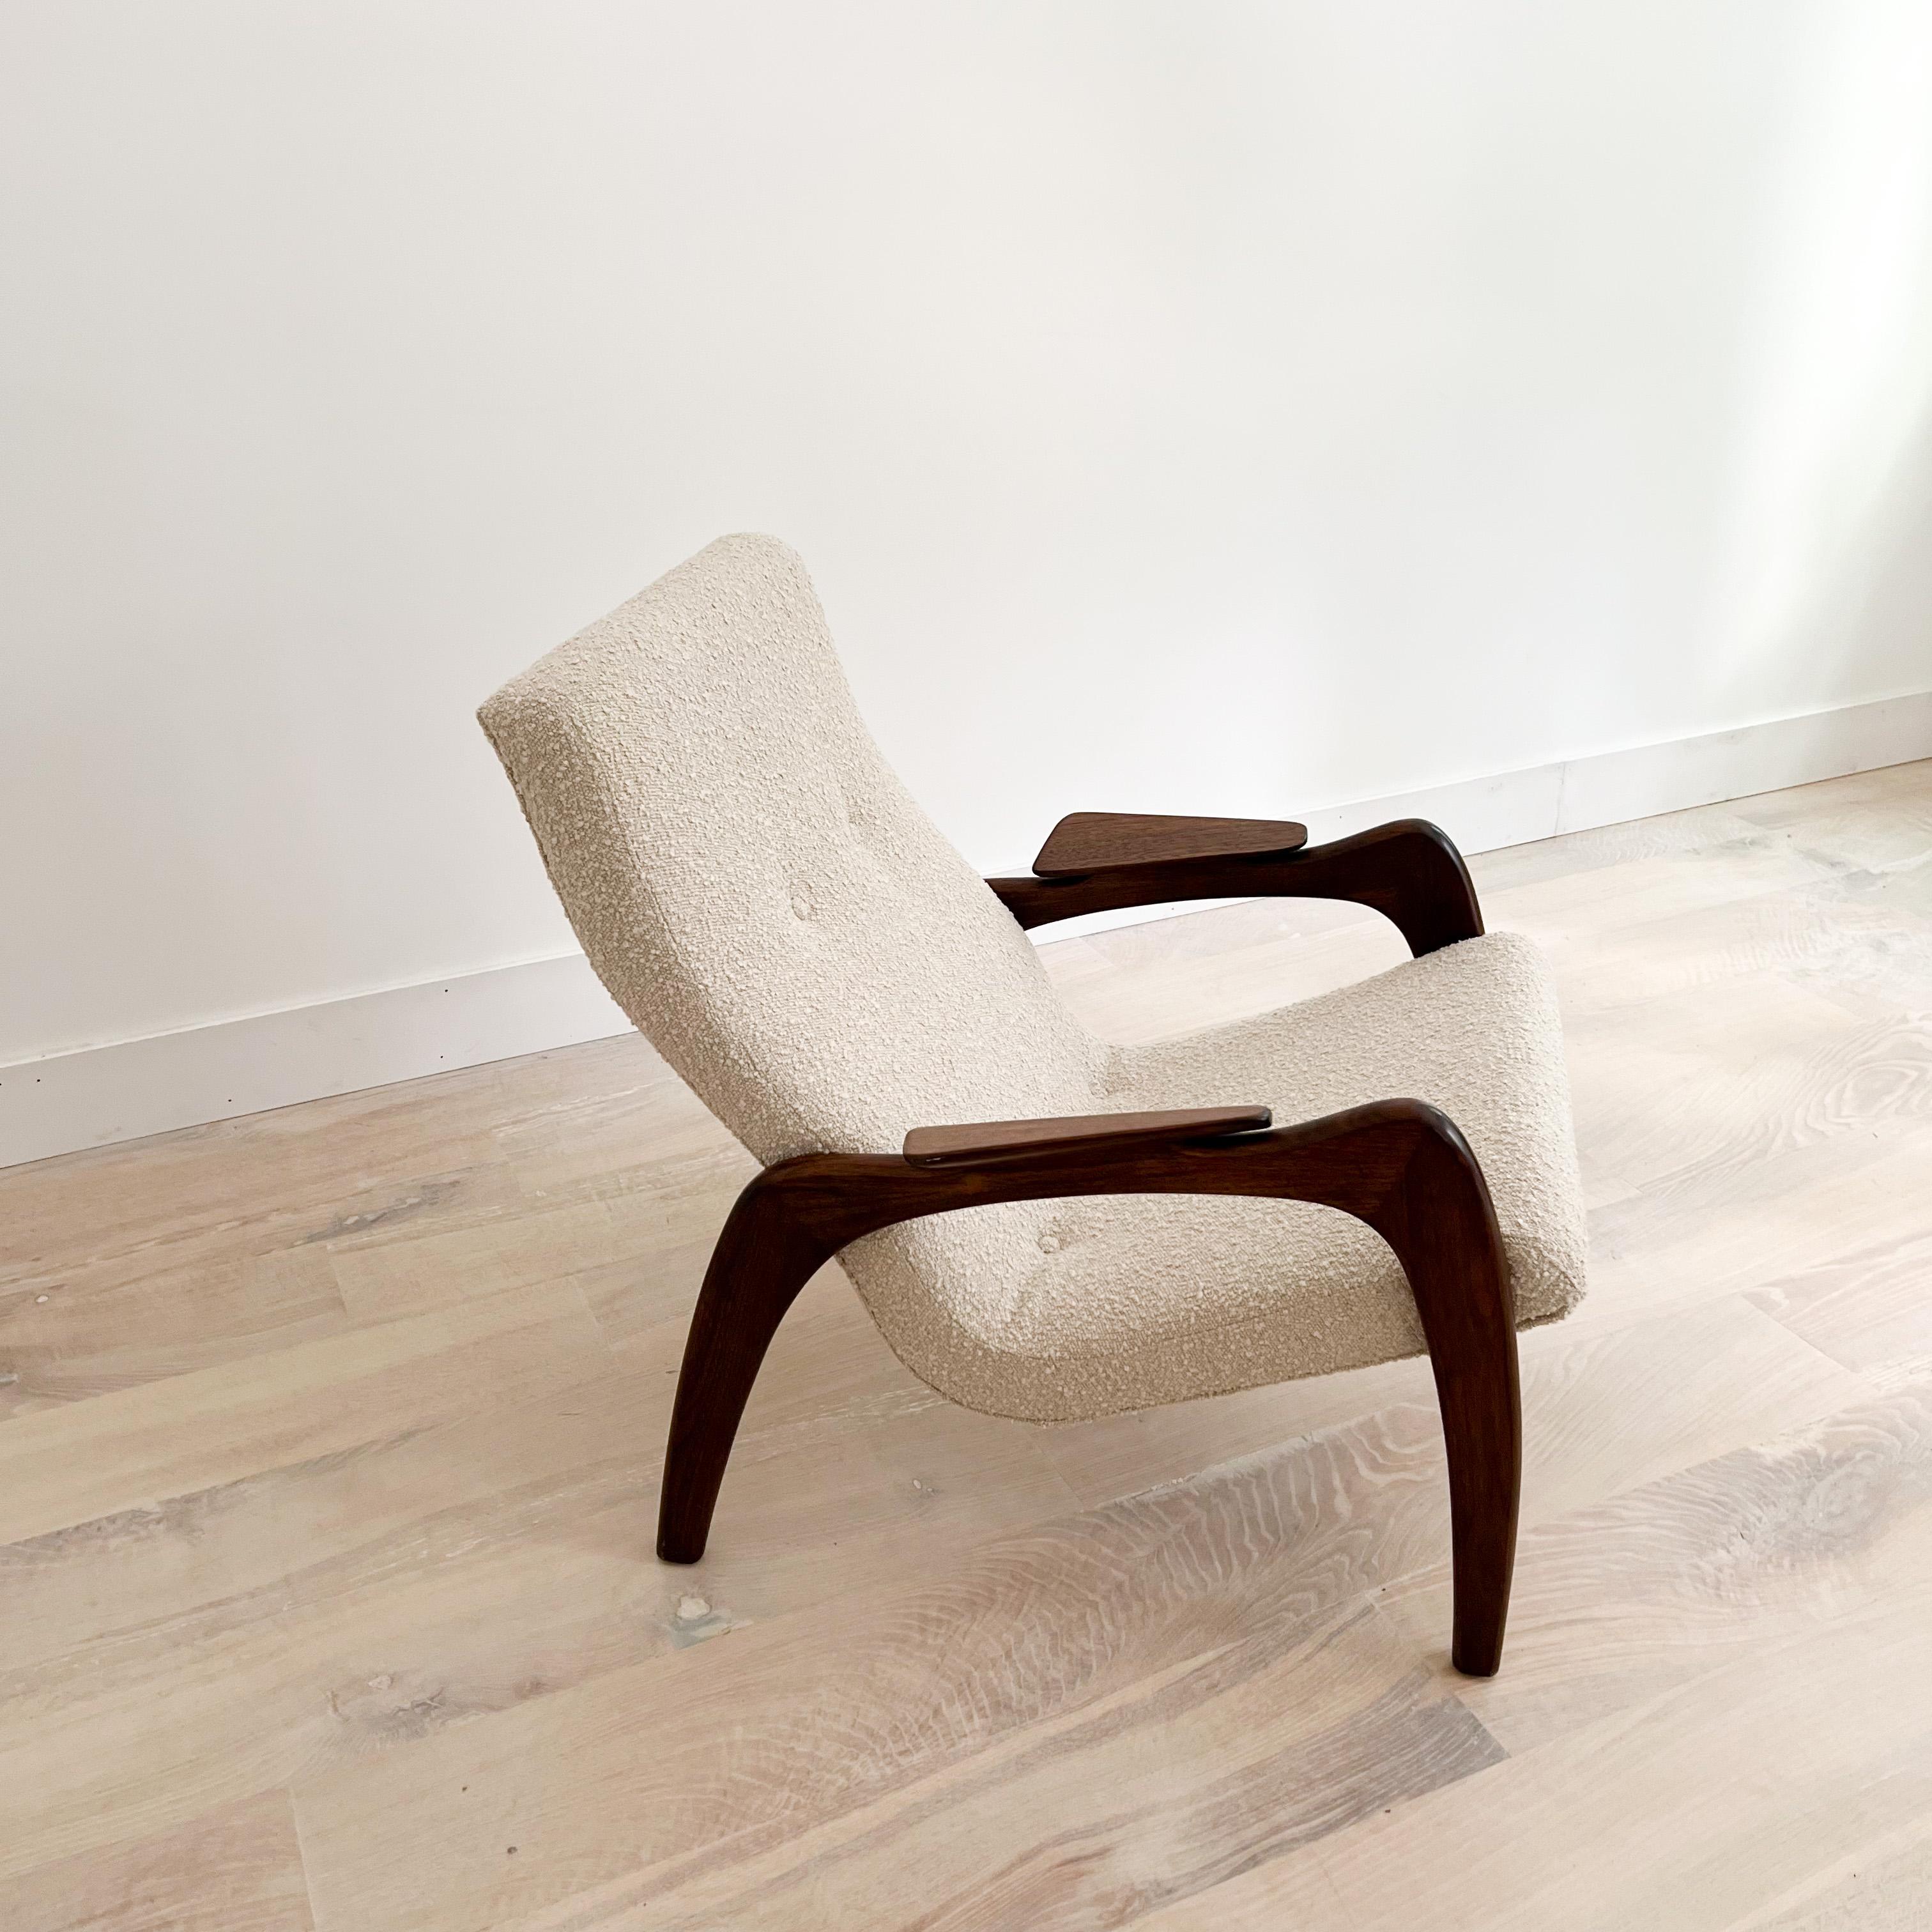 Mid-Century Modern scoop lounge chair with sculpted solid walnut frame designed by Adrian Pearsall for Craft Associates. New foam and oatmeal toned boucle upholstery. Some light scuffing/scratching to the walnut frame but overall good condition.